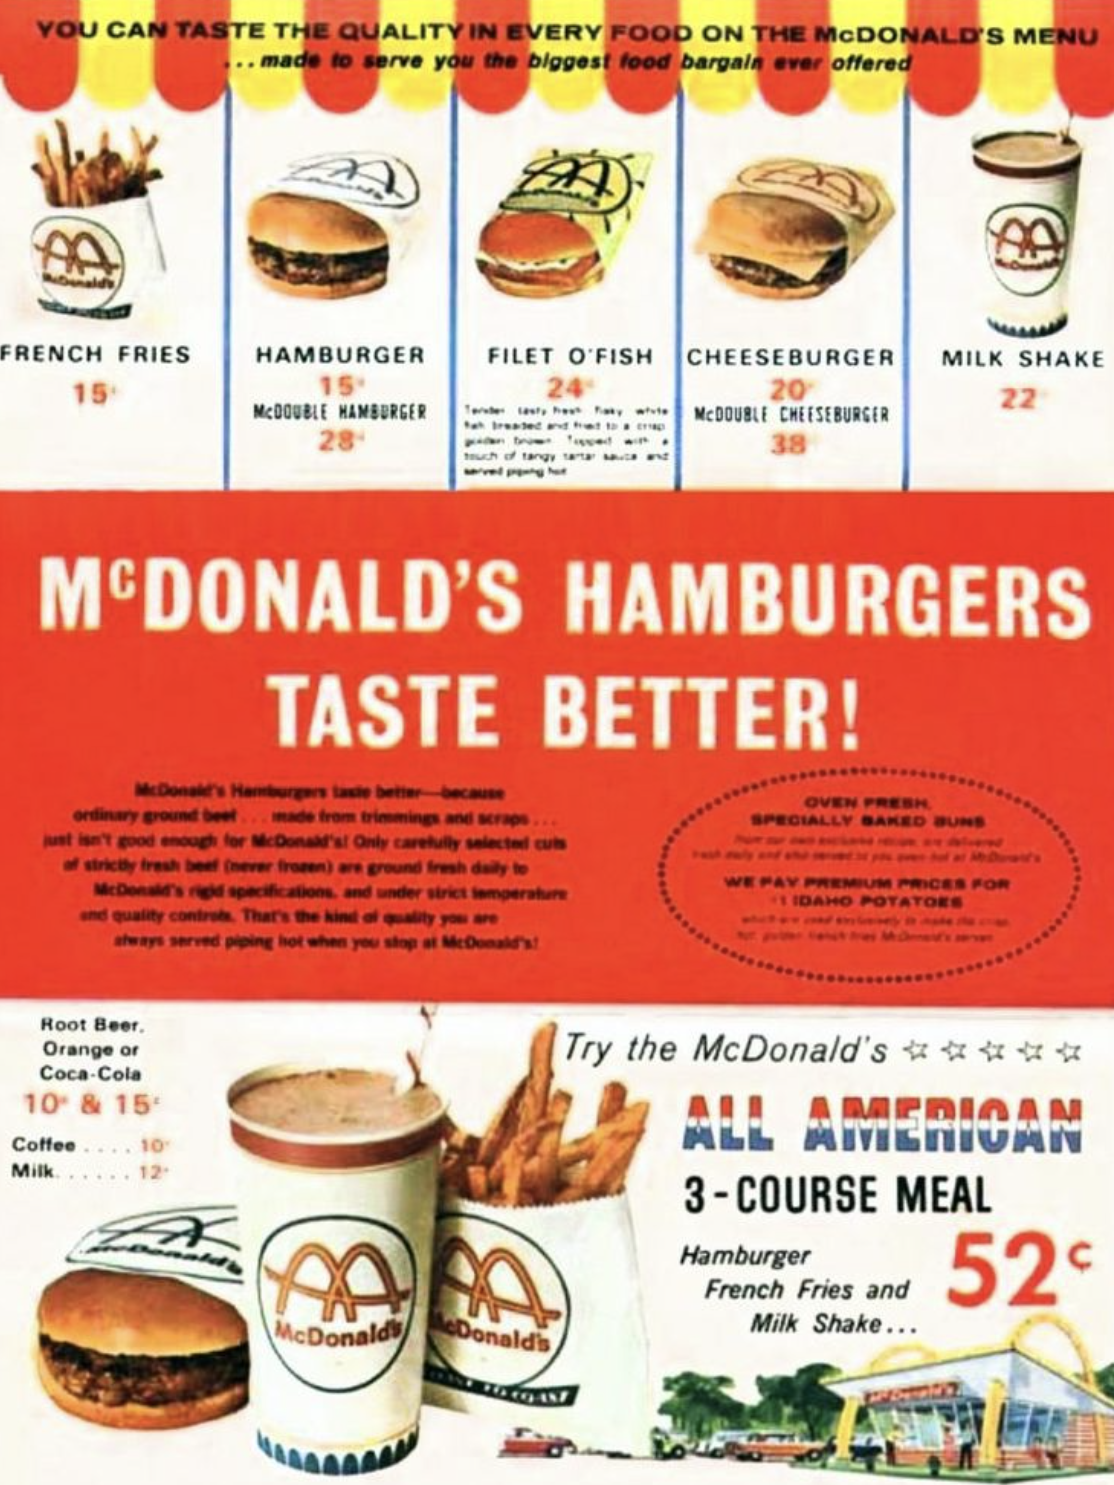 vintage mcdonalds menu - You Can Taste The Quality In Every Food On The Mcdonald'S Menu ...made to serve you the biggest food bargale ever offered French Fries Hamburger Filet O'Fish Cheeseburger Milk Shake 15 20 Mcdonald'S Hamburgers Taste Better! Root B